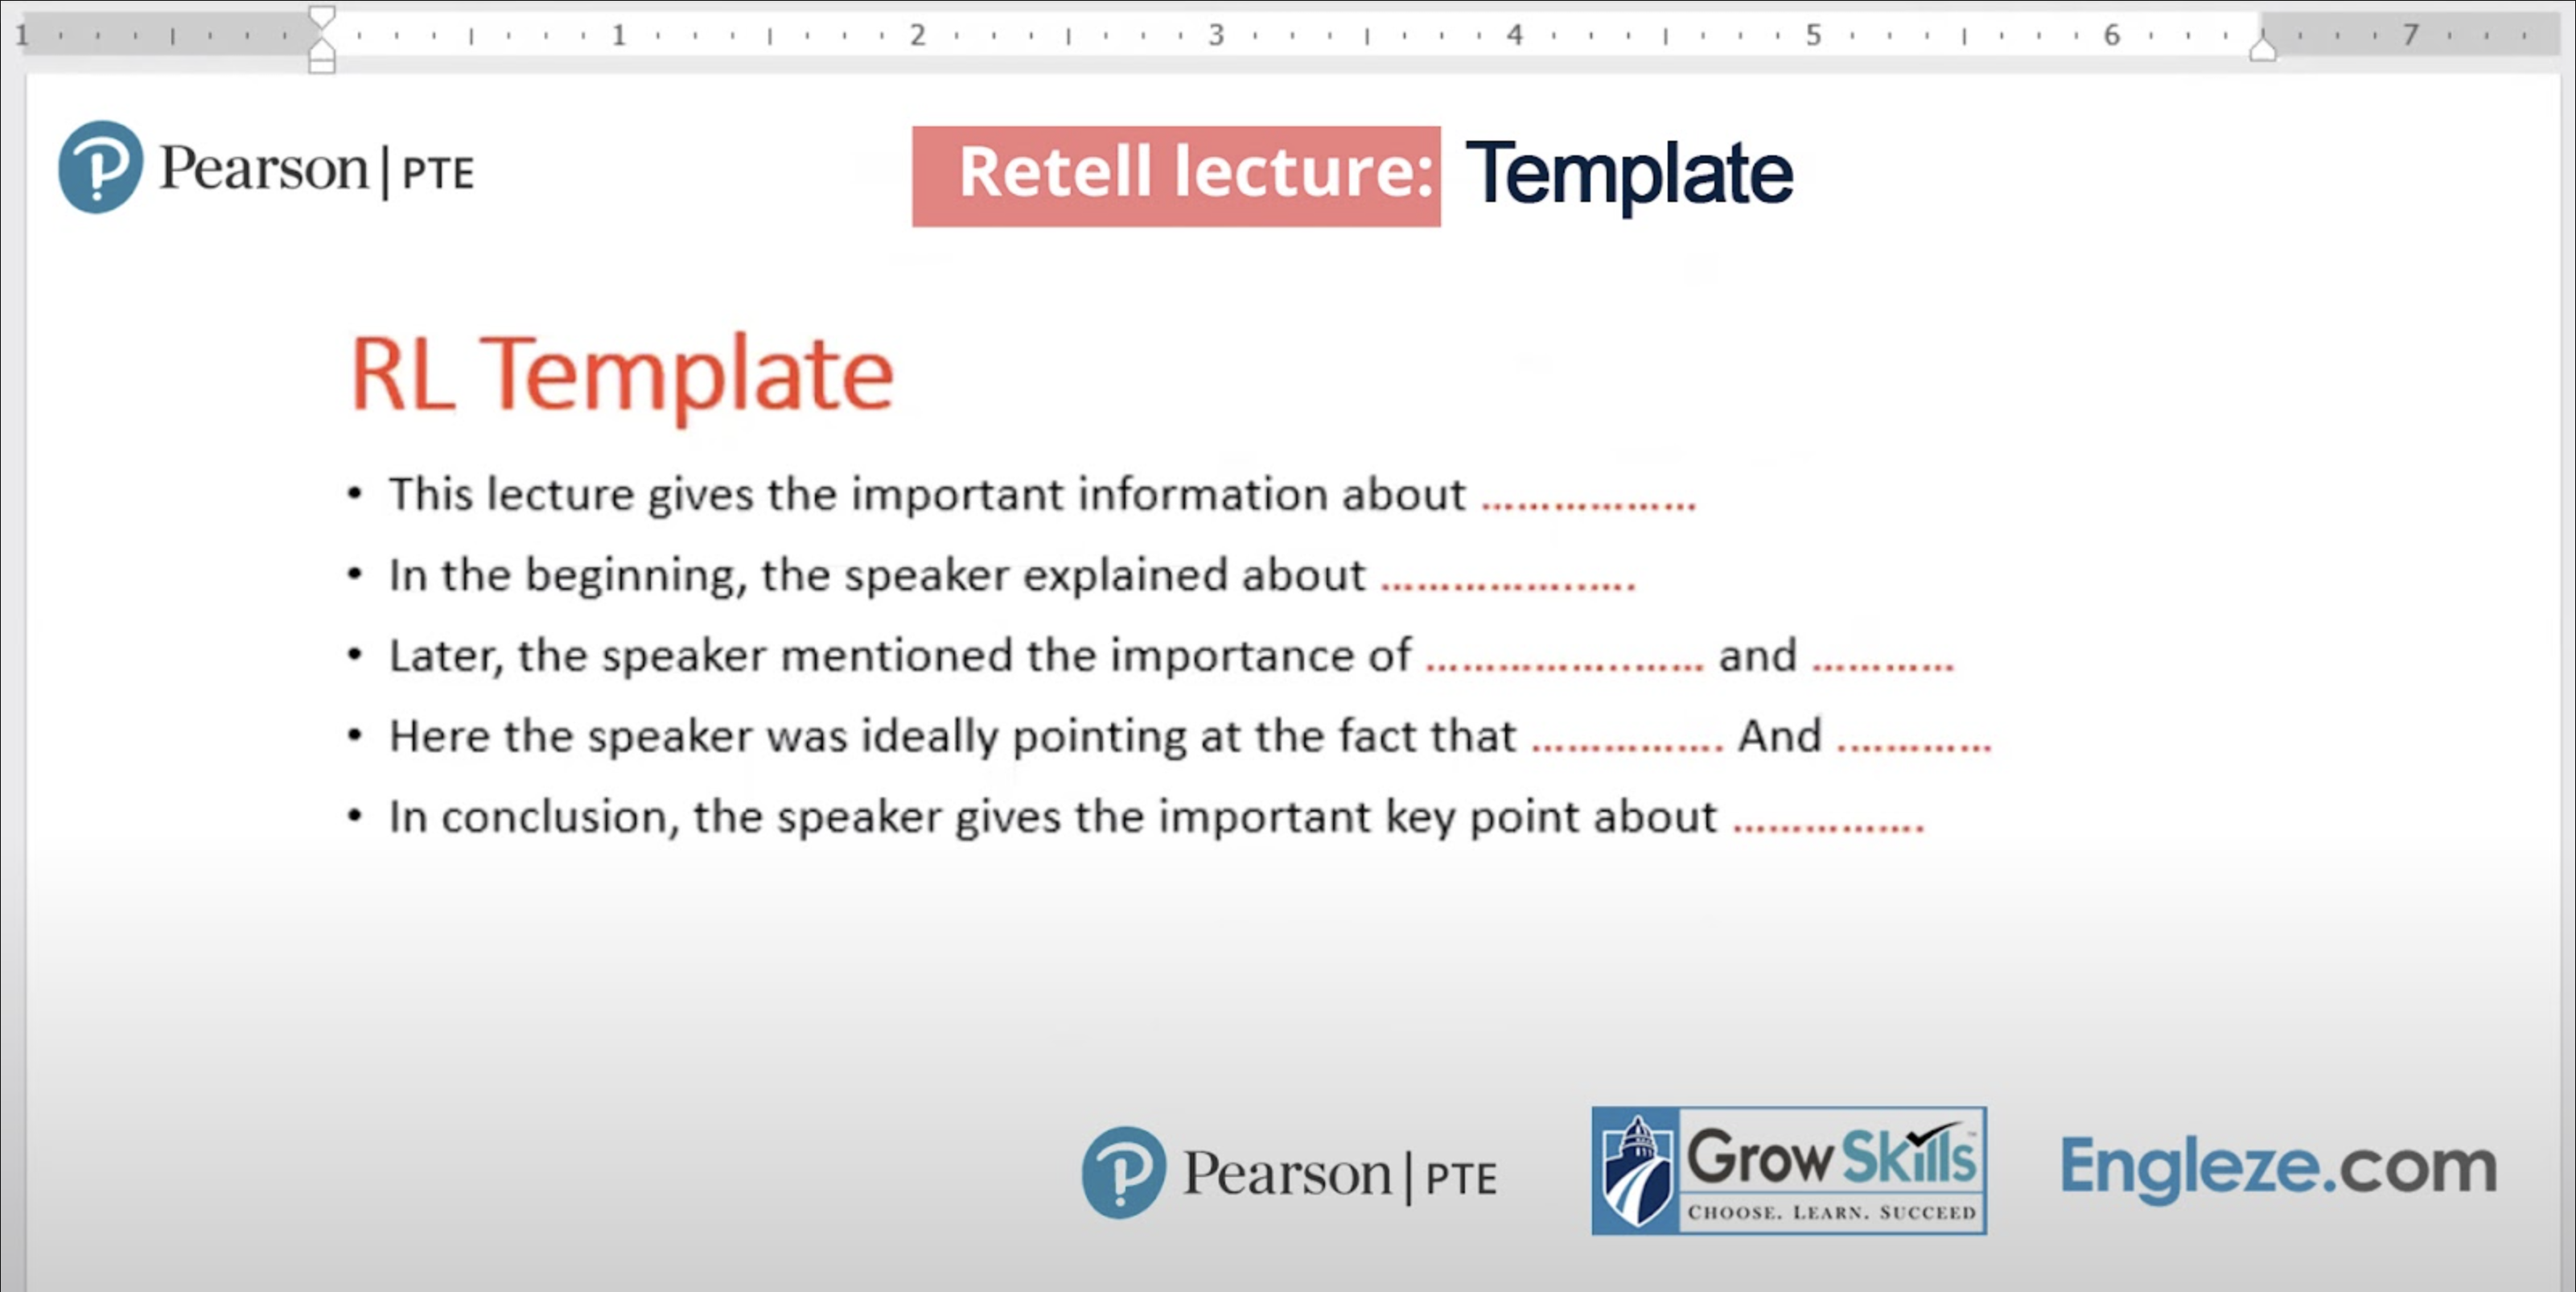 PTE – Re-tell Lecture Template